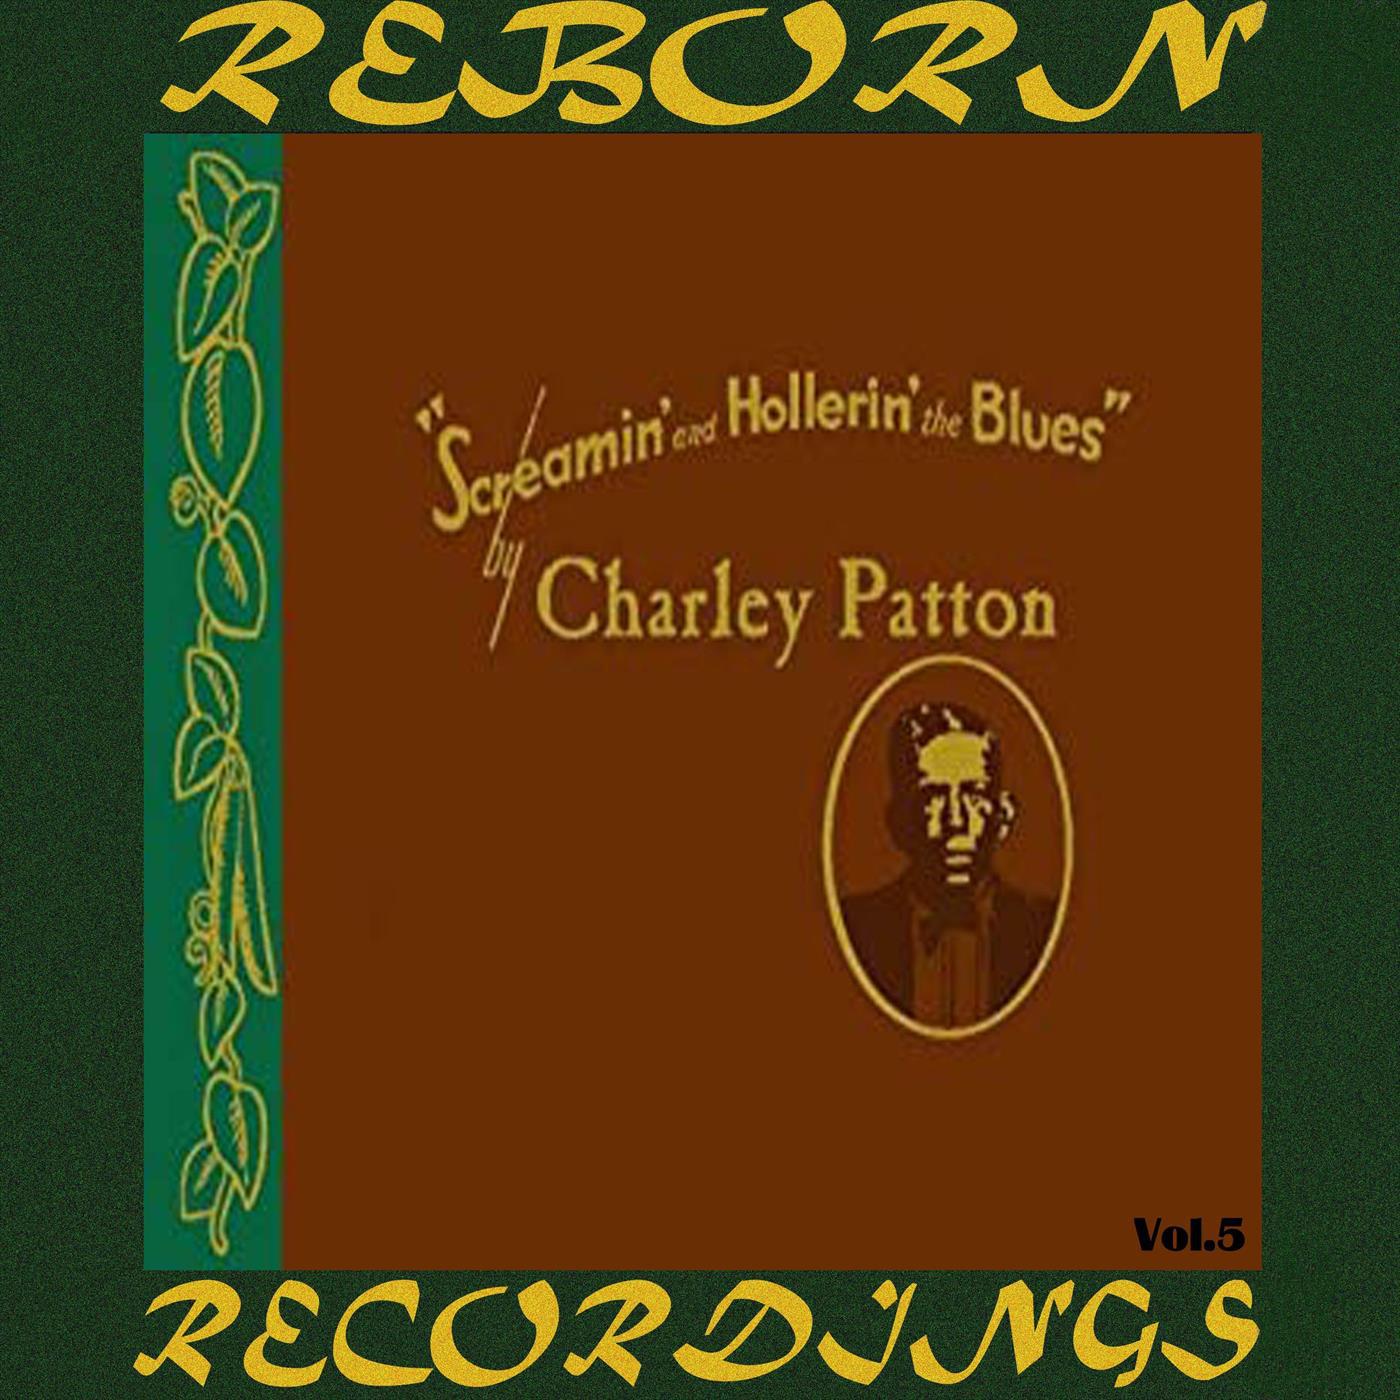 Screamin' and Hollerin' the Blues The Worlds of Charley Patton, Vol.5 (HD Remastered)